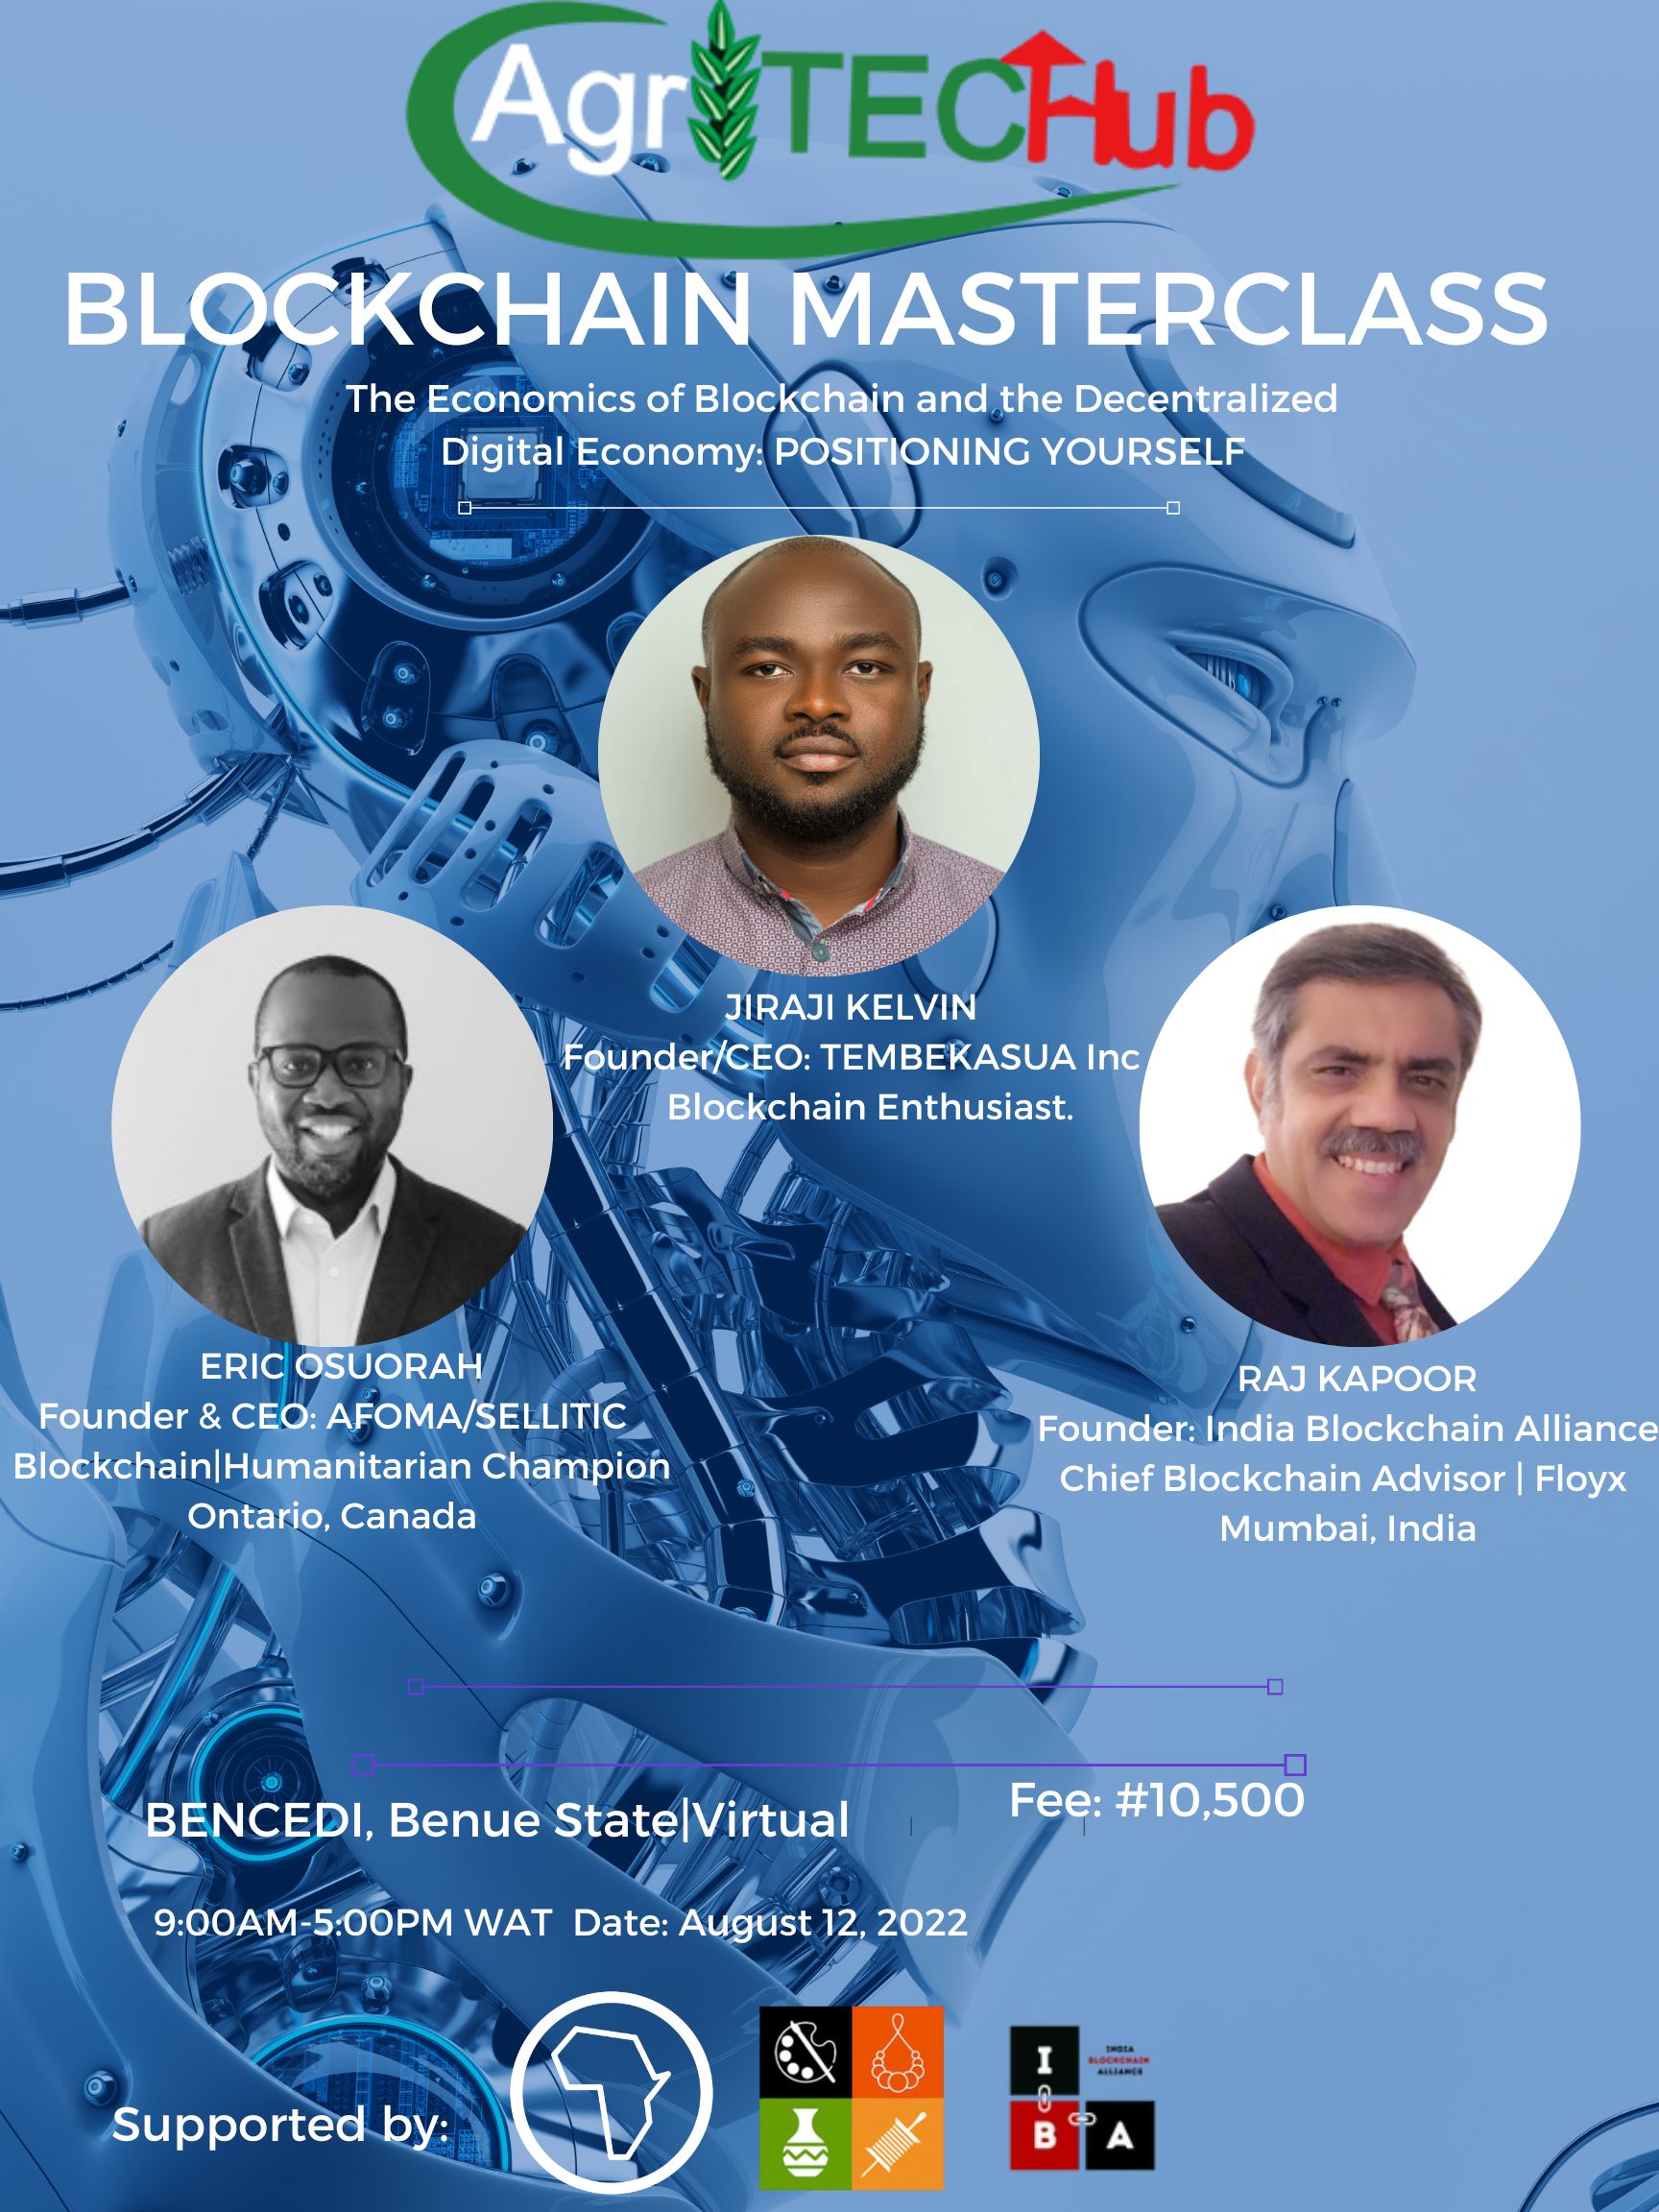 BLOCKCHAIN Masterclass with Kelvin Jiraji: The Economics of emerging technologies; positioning yourself. Post free event in Nigeria using tickethub.ng, buy and sell tickets to event